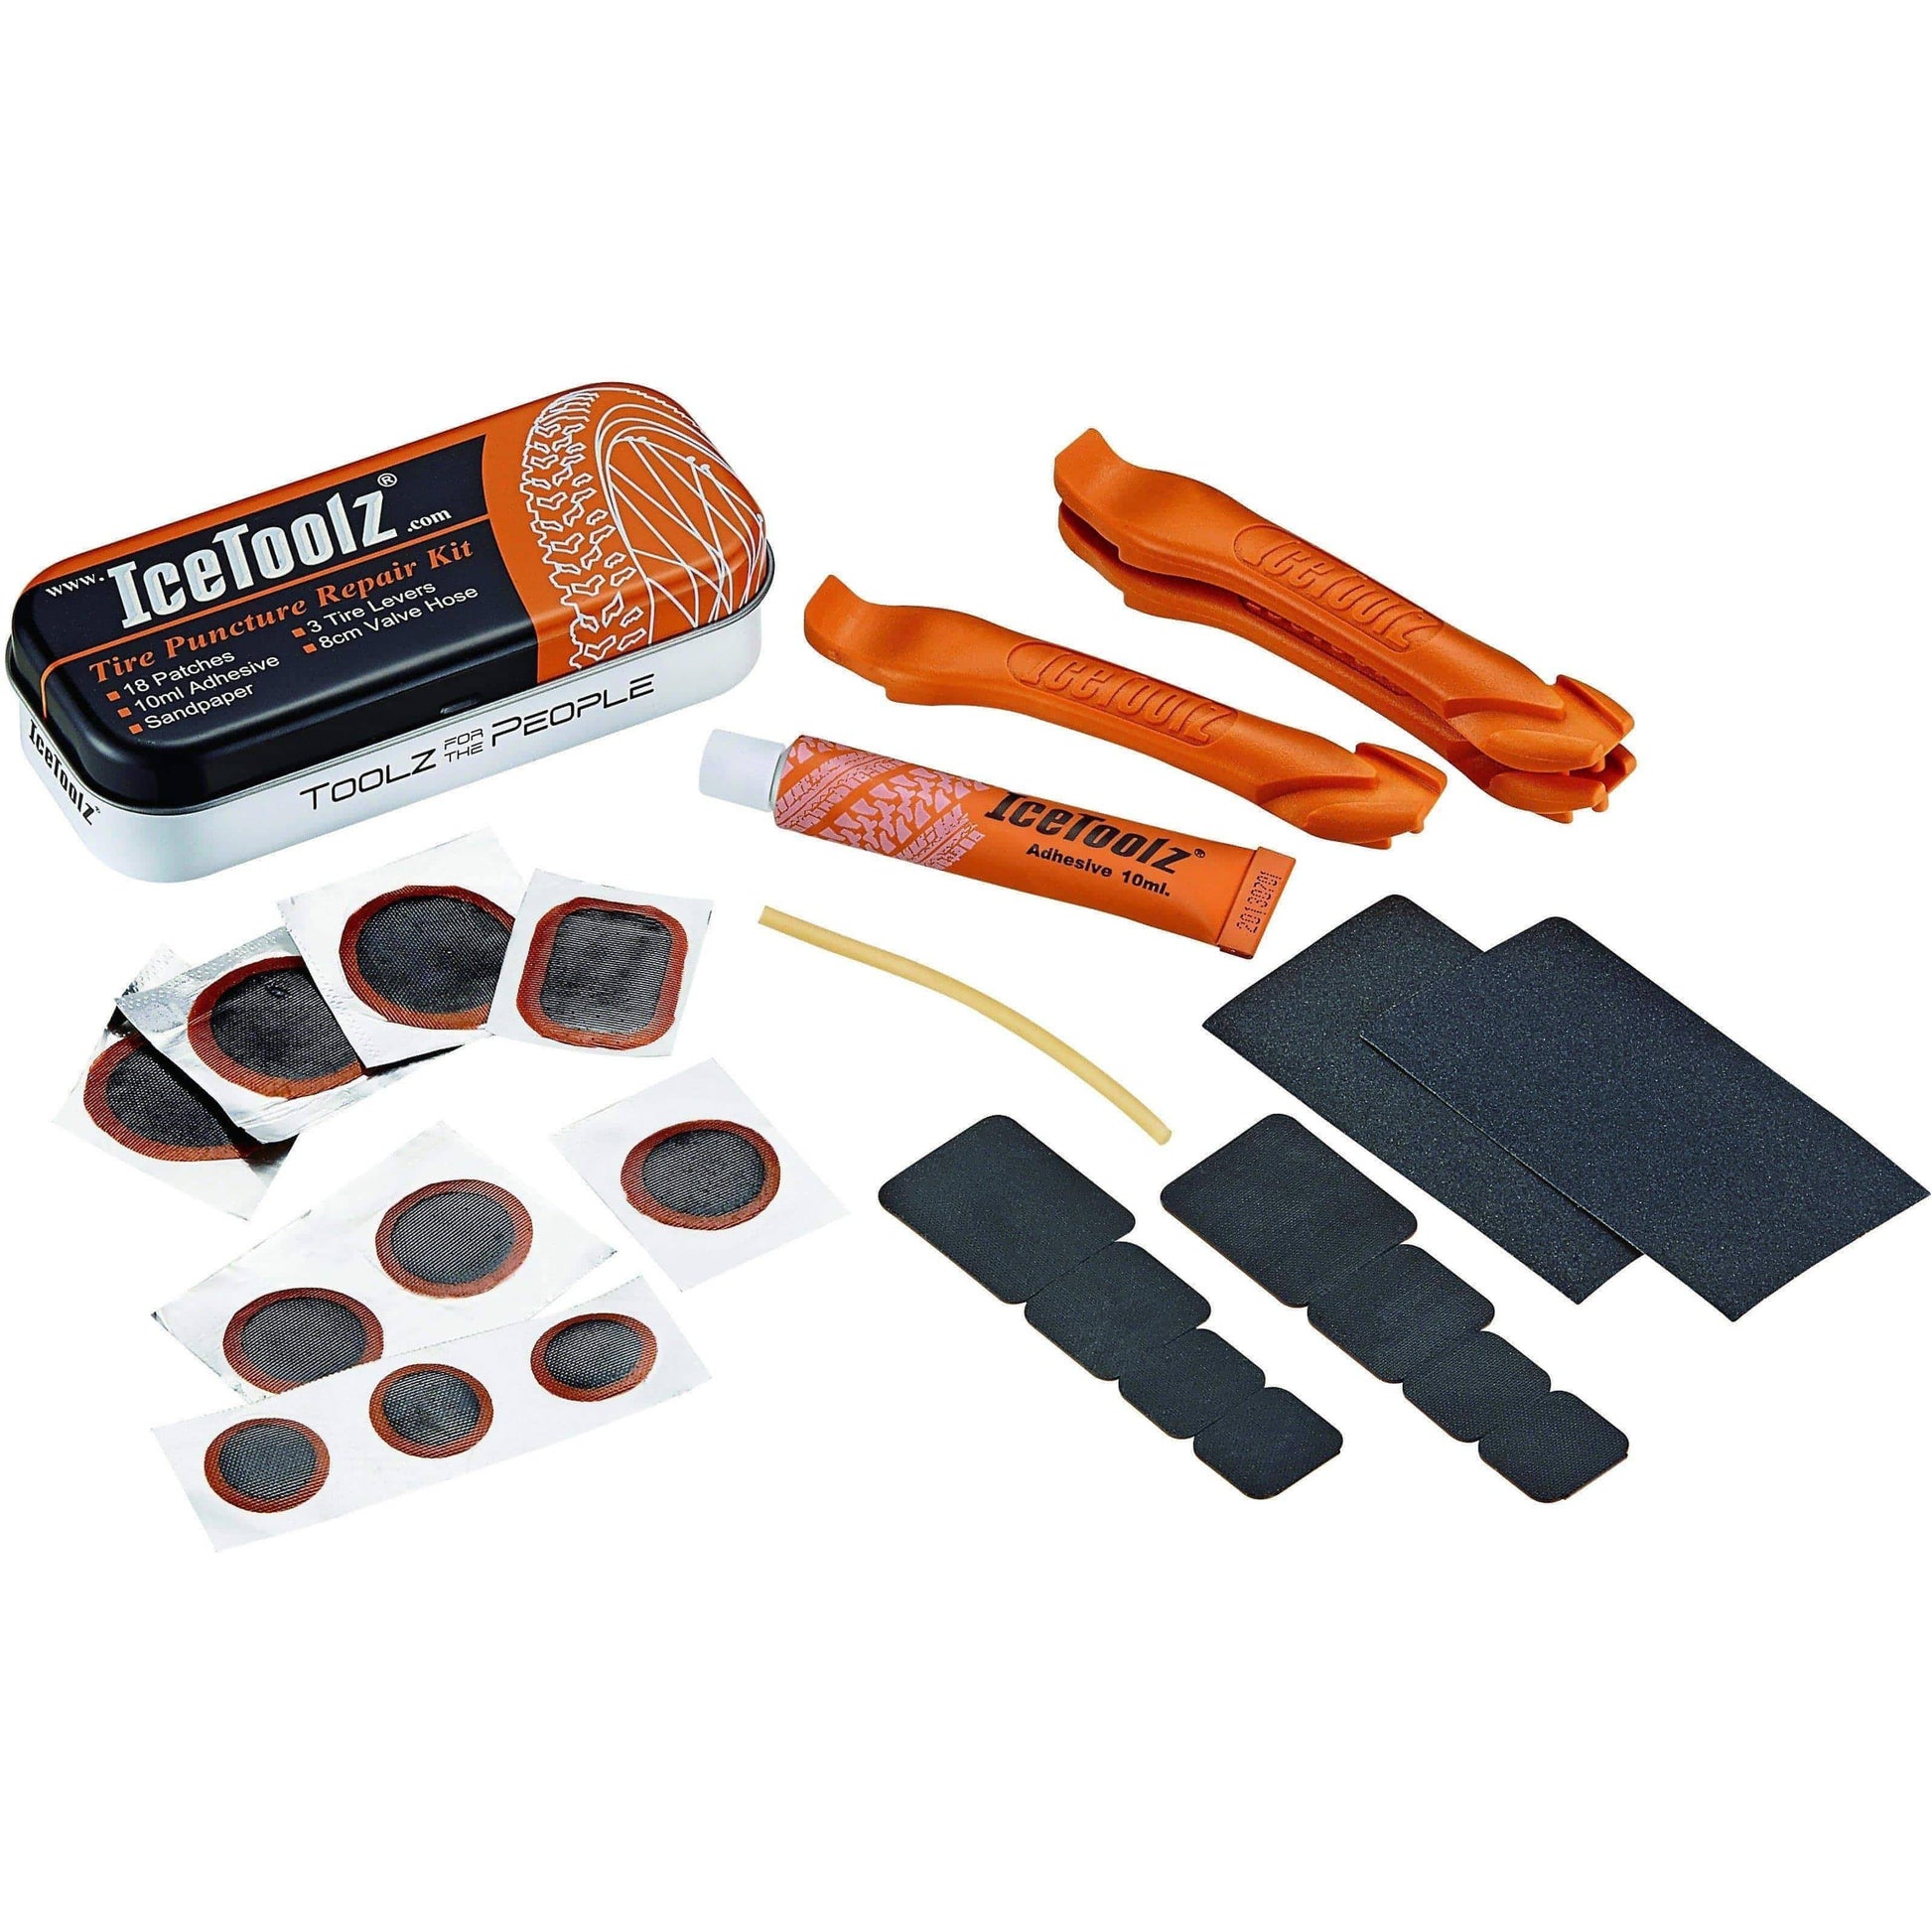 Ice Toolz Puncture Repair Kit 4718152651013 - Start Fitness